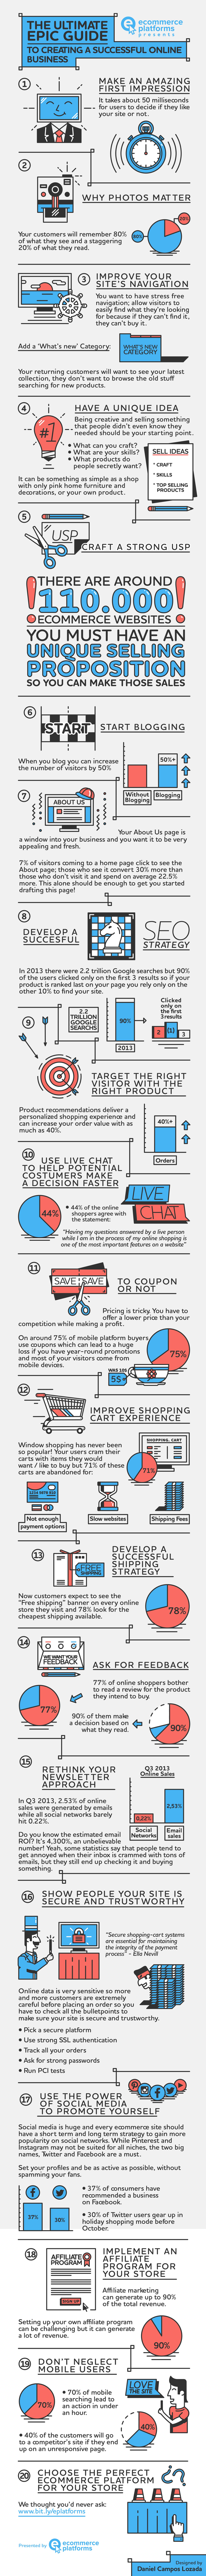 Infographic: The Ultimate Guide to Creating a Successful Online Business